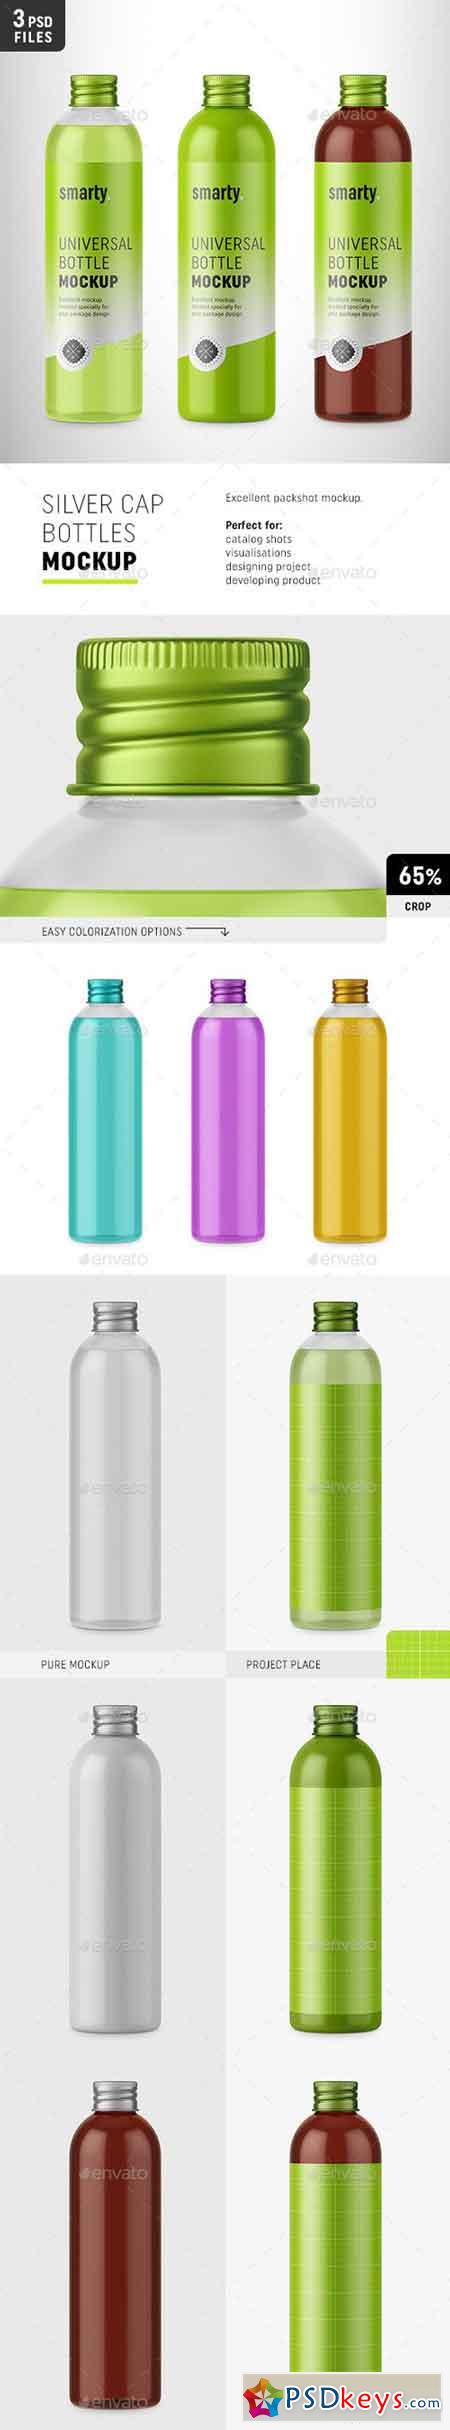 Bottles with Silver Cap Mockup 20234390